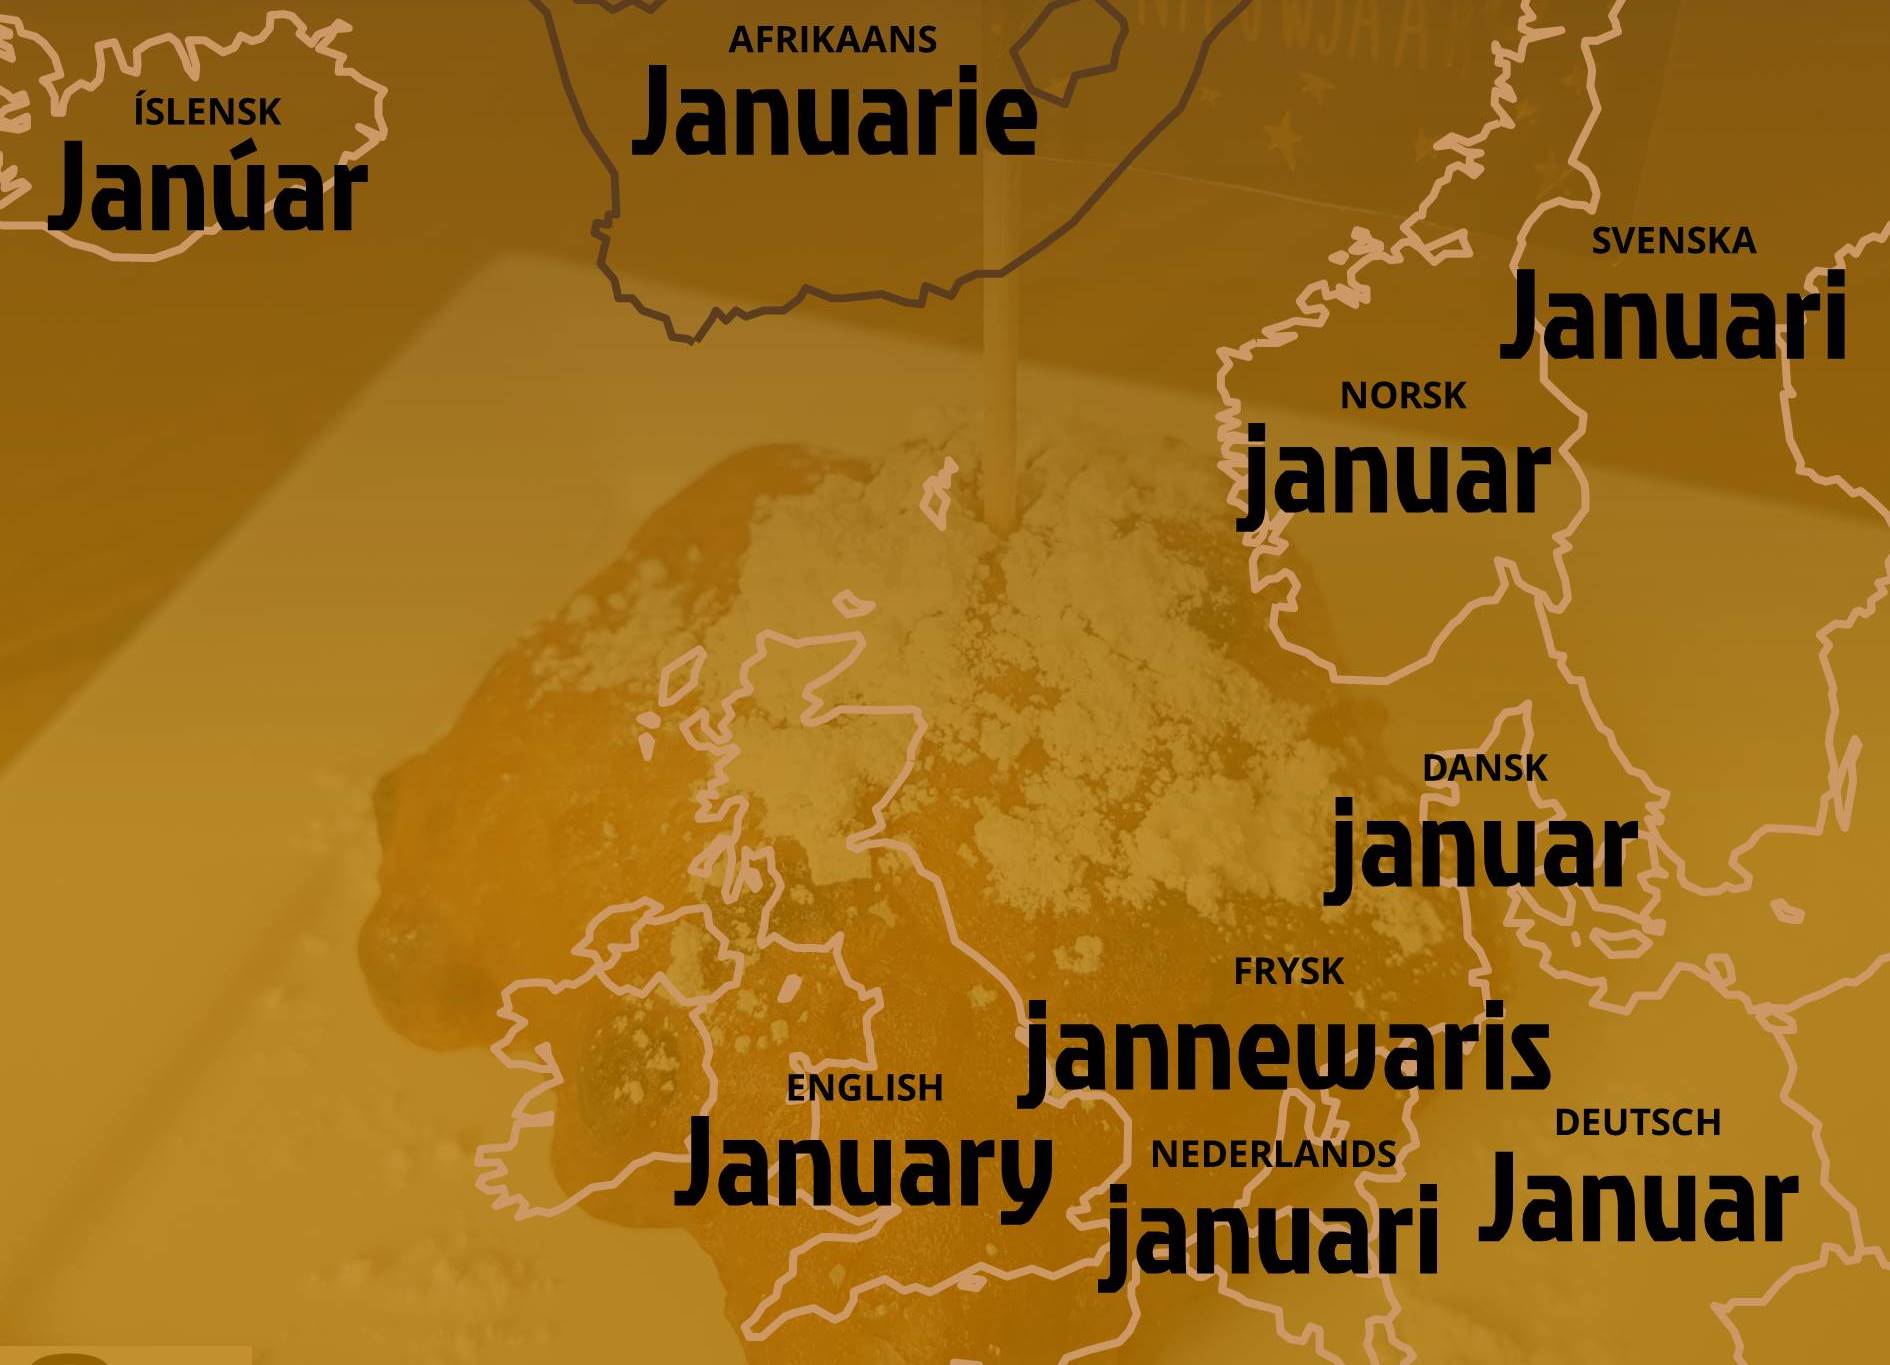 'January' in nine languages.